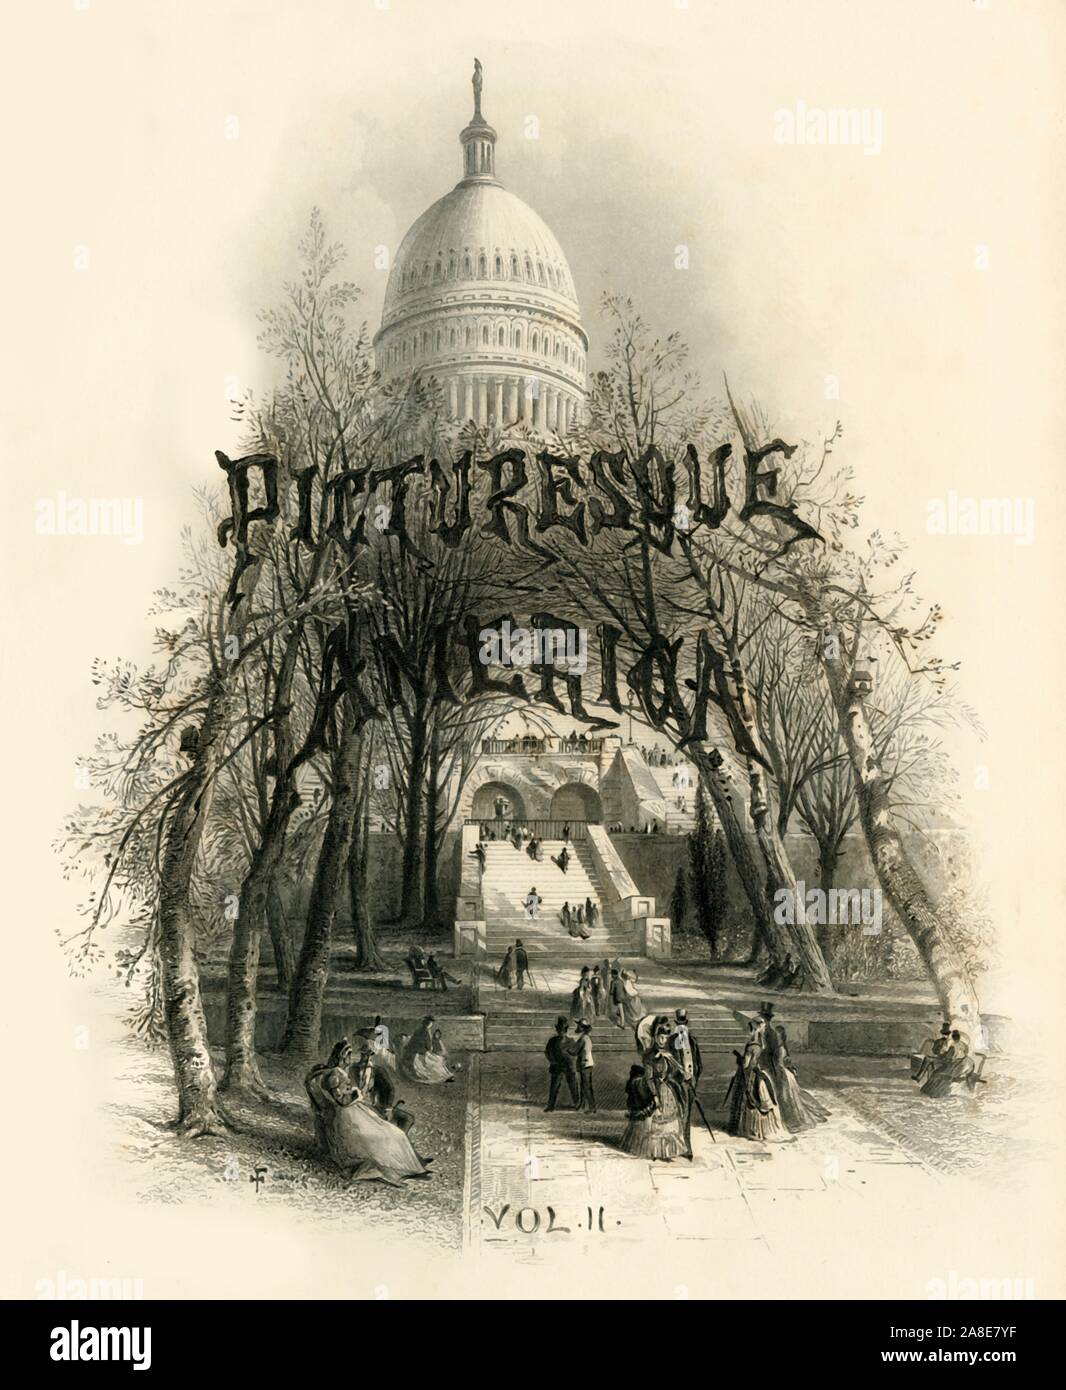 'Dome of the Capitol', 1874. The Capitol Building in Washington DC. USA, with rustic lettering. Title page from &quot;Picturesque America; or, The Land We Live In, A Delineation by Pen and Pencil of the Mountains, Rivers, Lakes...with Illustrations on Steel and Wood by Eminent American Artists&quot; Vol. II, edited by William Cullen Bryant. [D. Appleton and Company, New York, 1874] Stock Photo